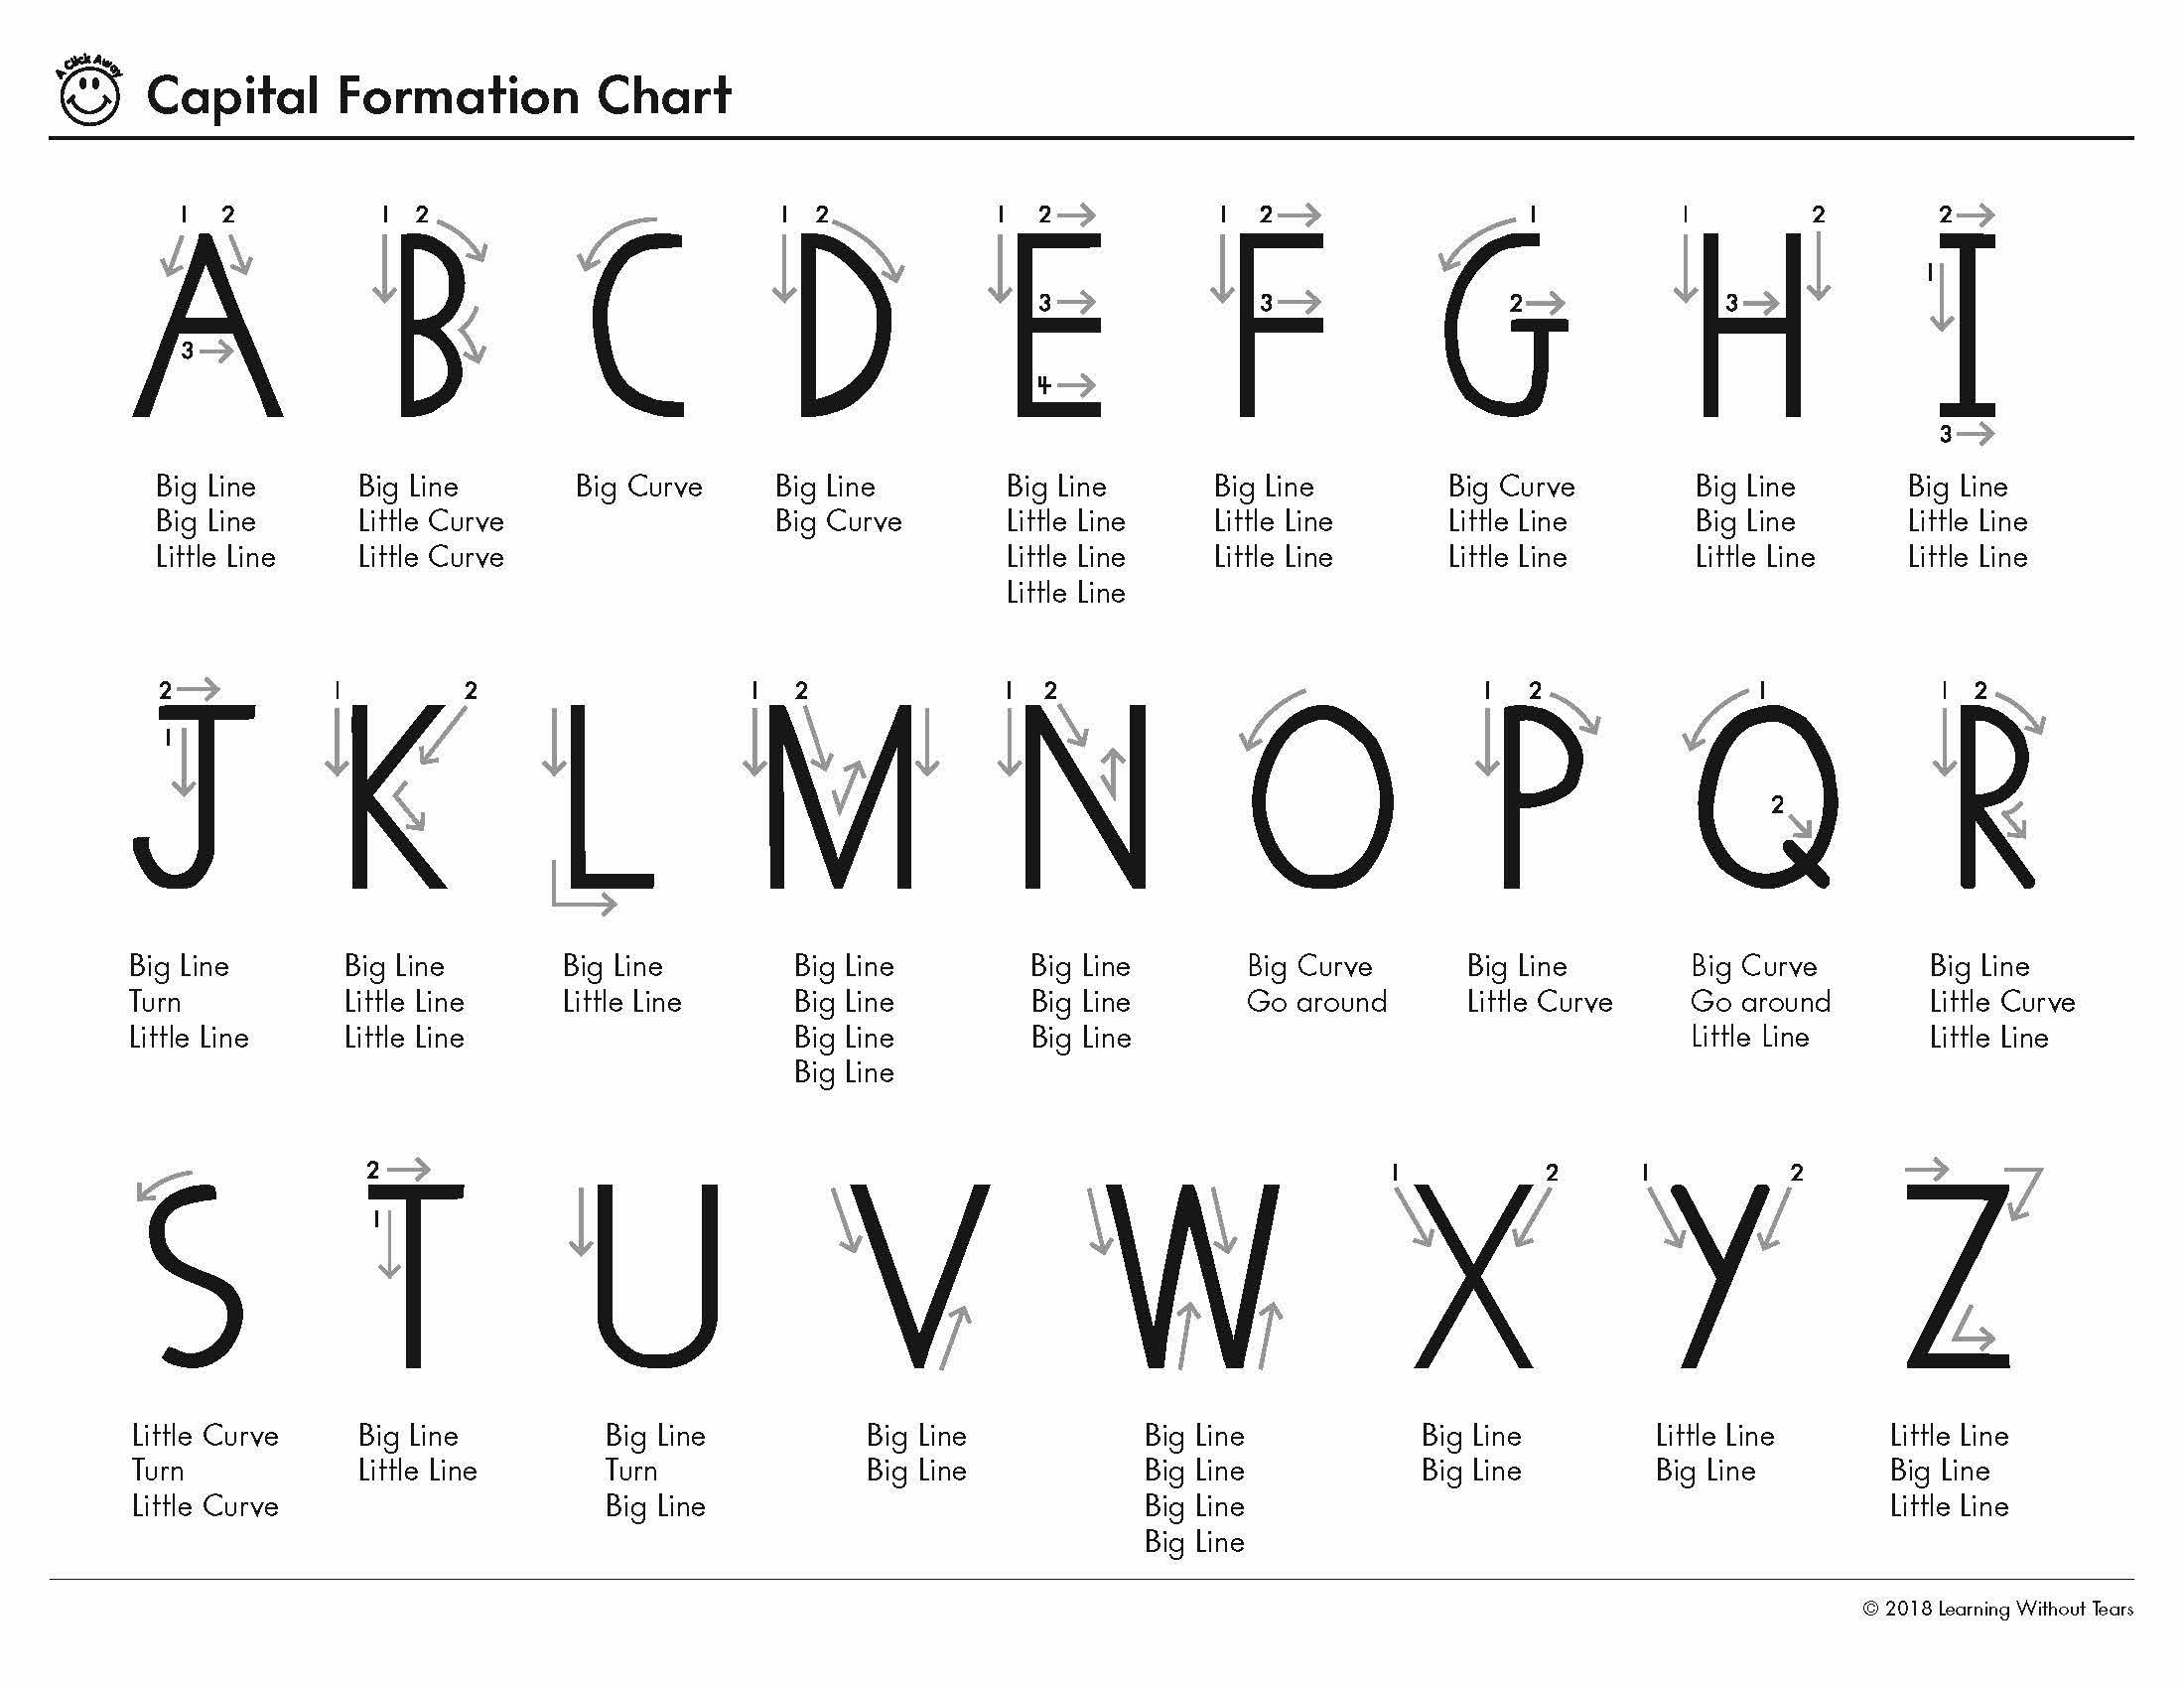 Capital Letter Formation Chart